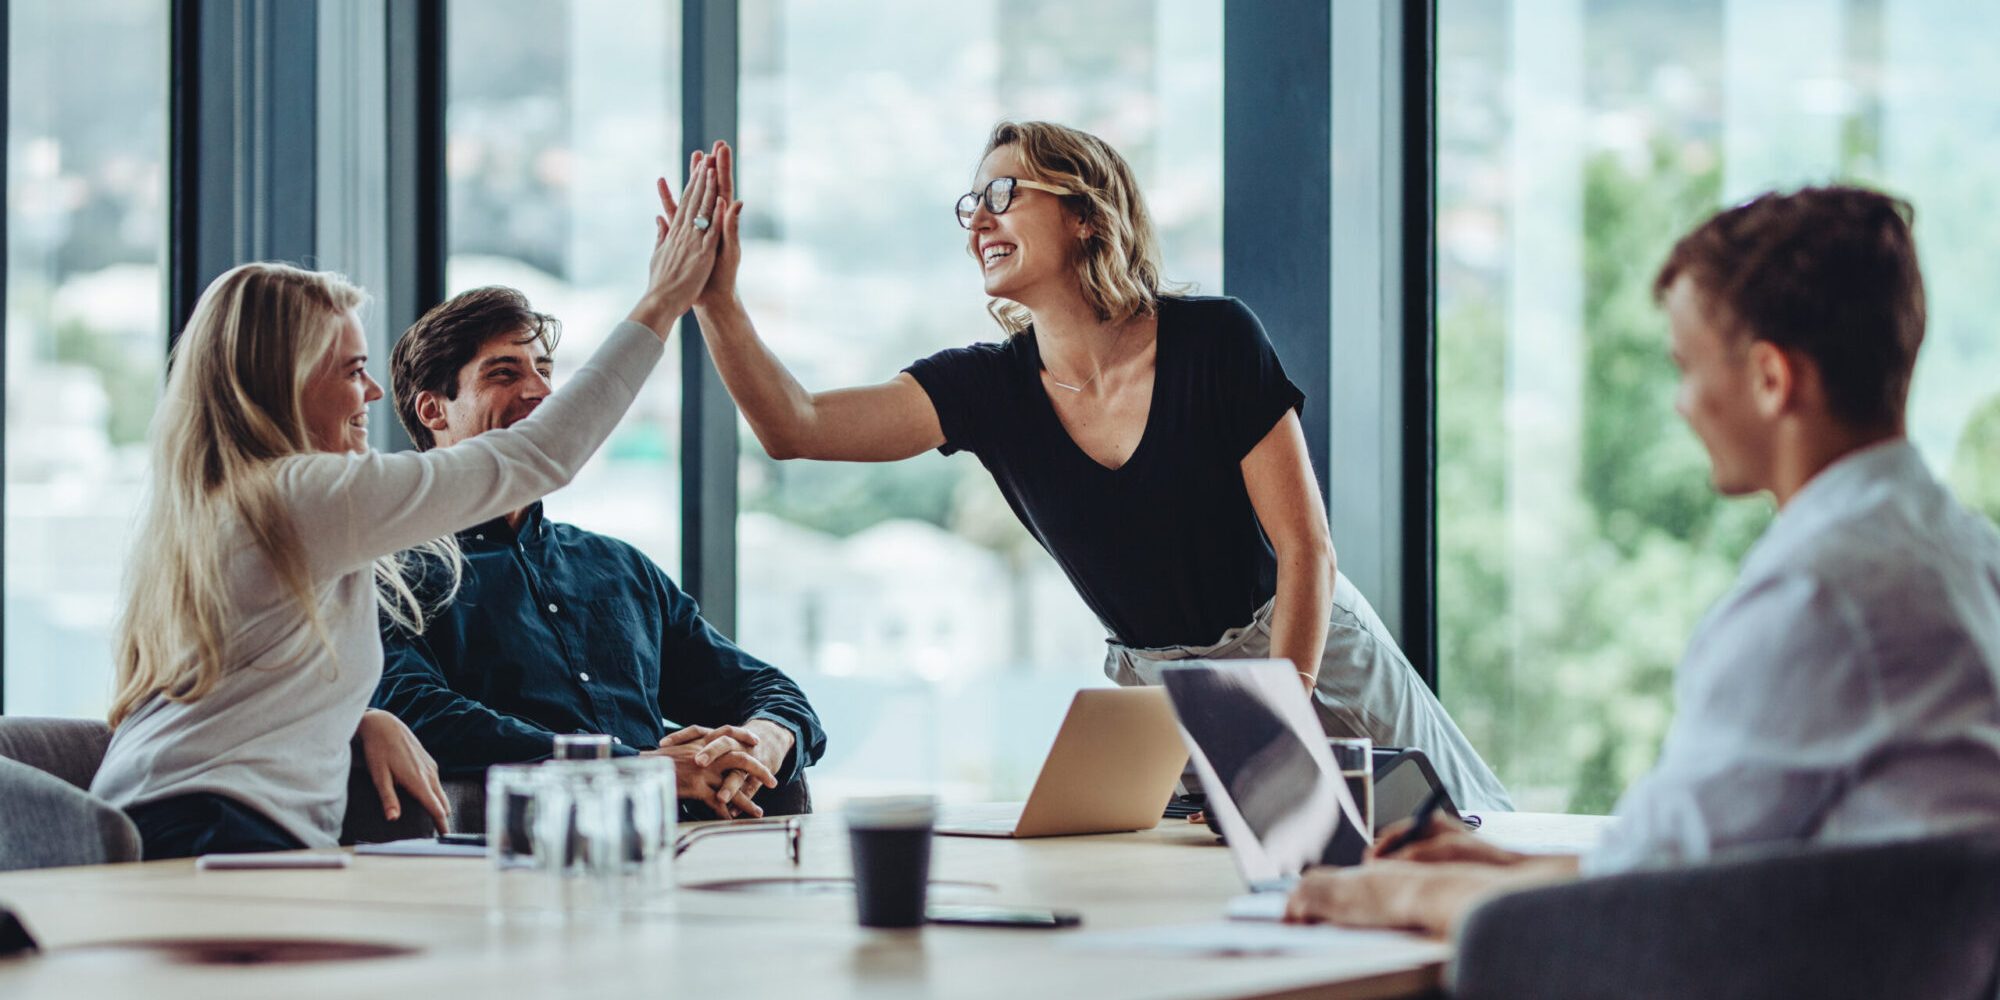 Female professional giving a high five to her colleague in conference room. Group of colleagues celebrating success in a meeting.